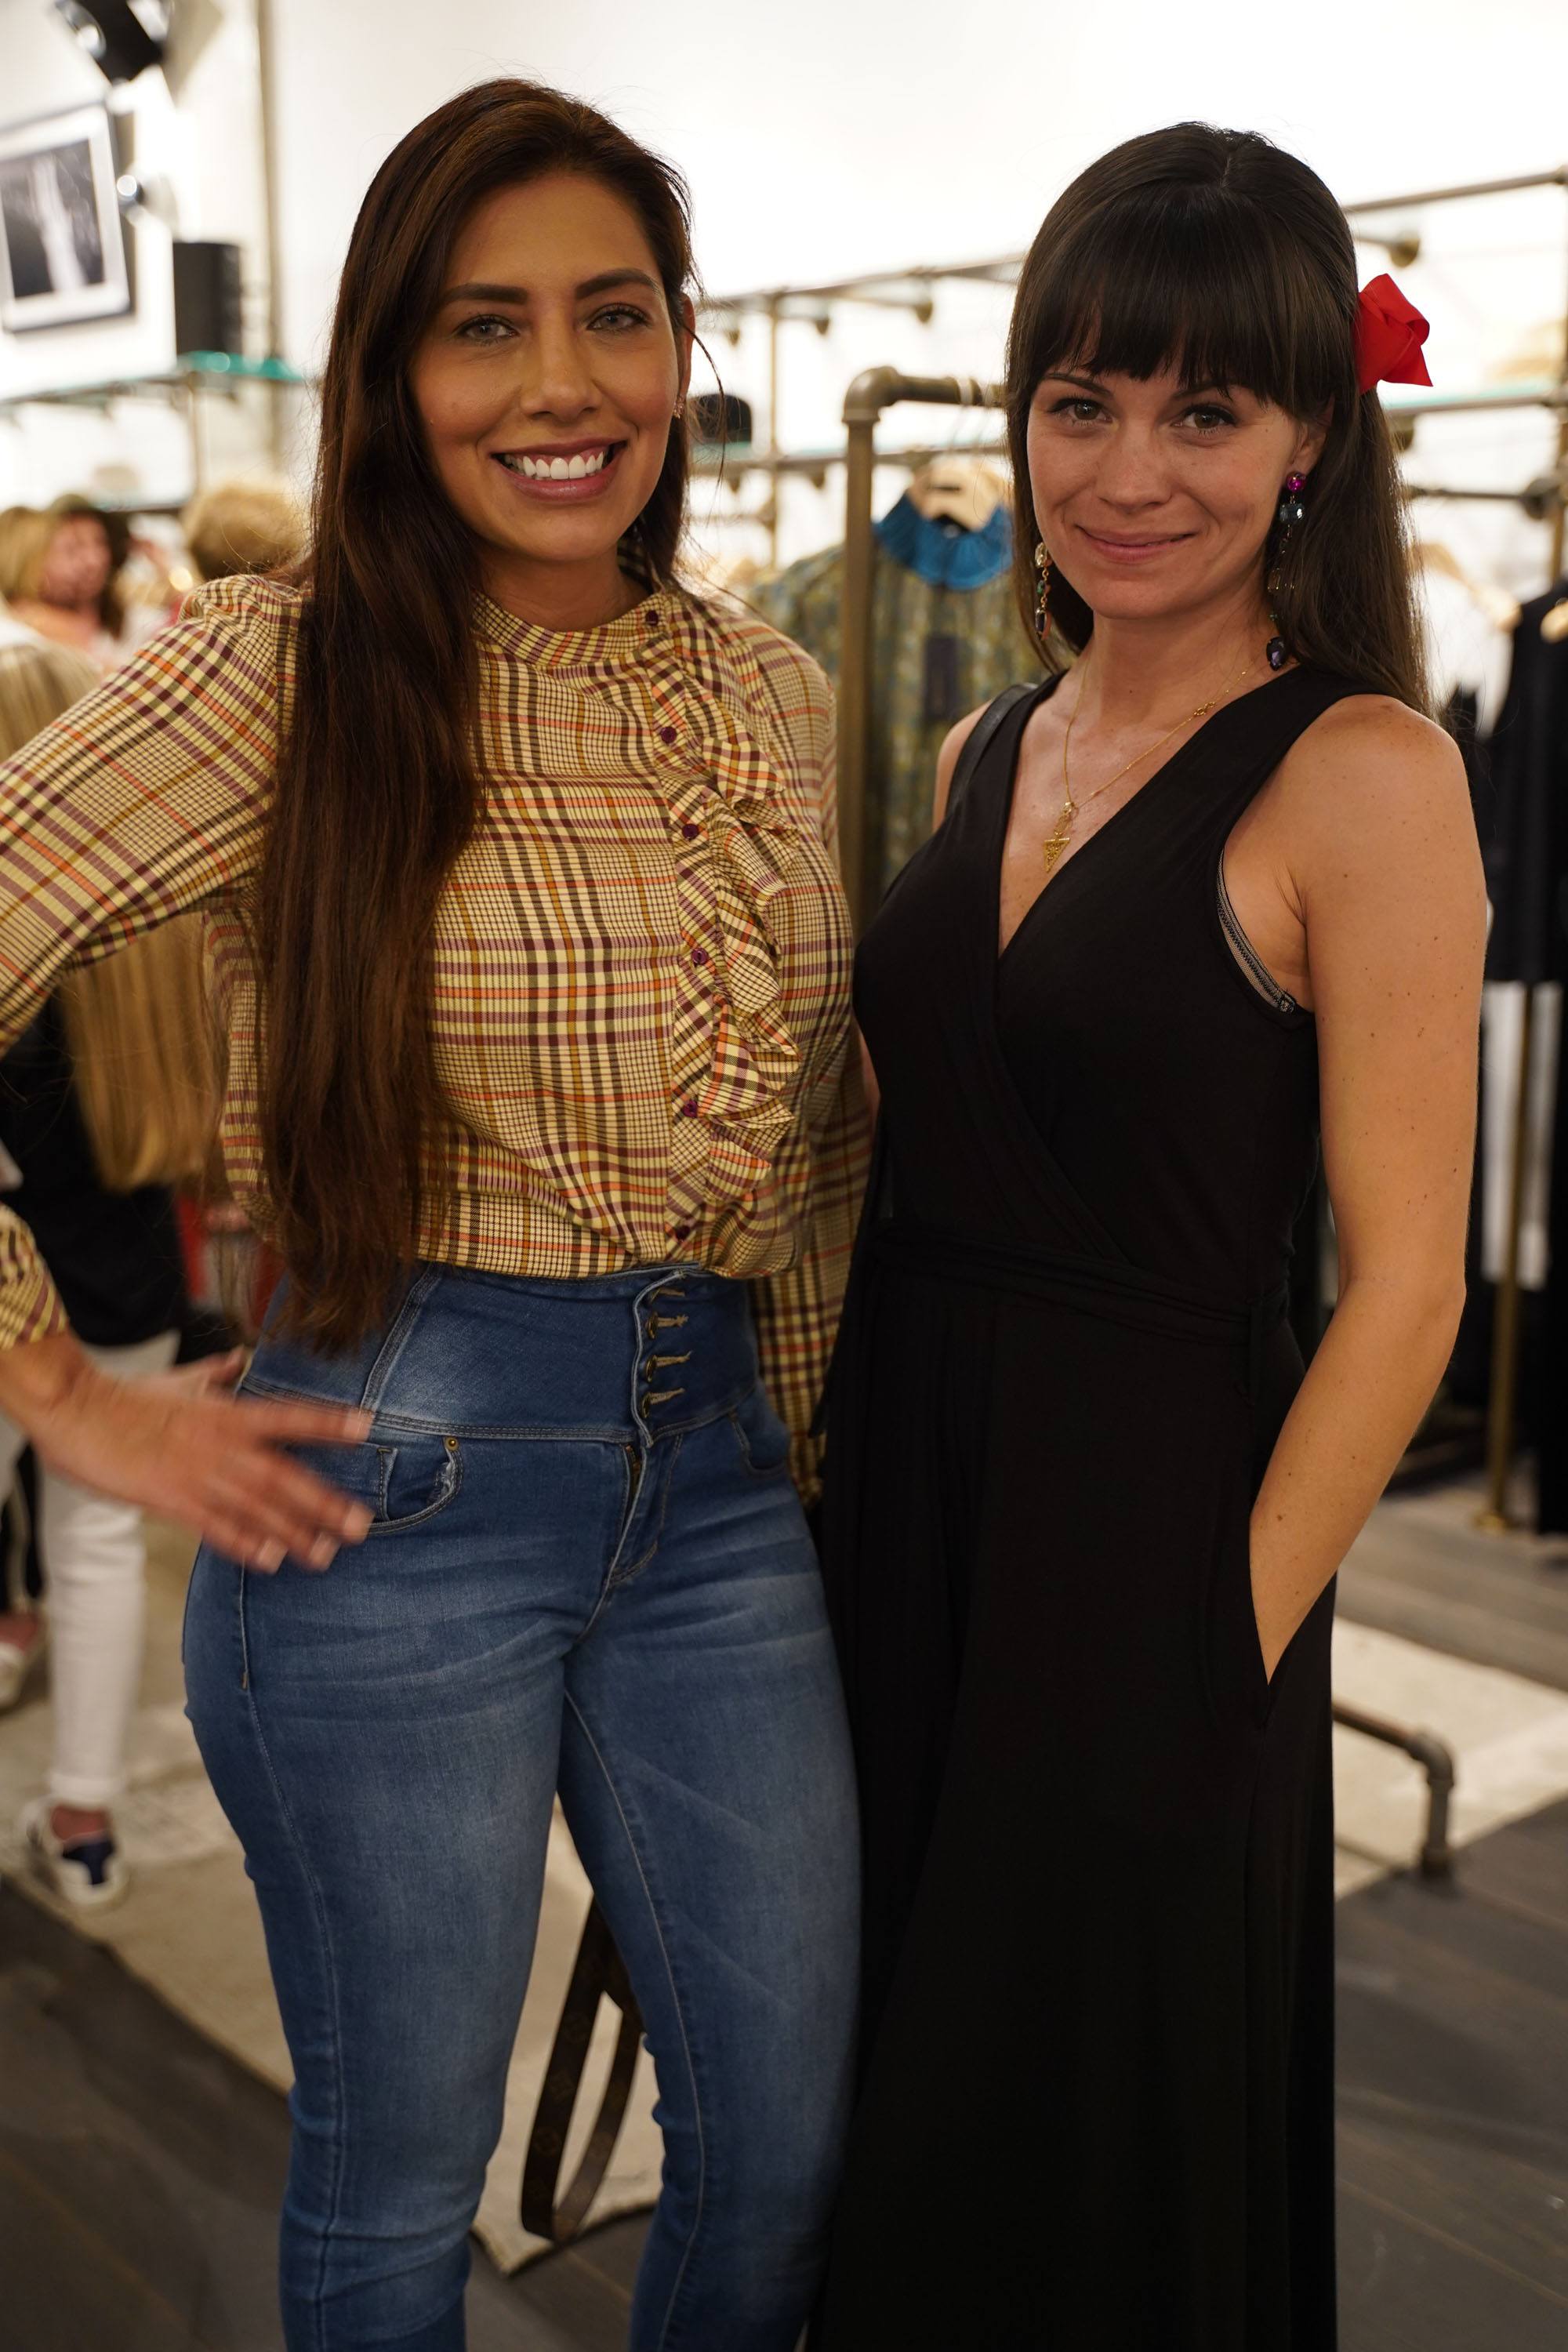 Geselle Helfers & Cassandra Youngs pose for a picture at Rag & Bone Bal Harbour celebrating the fundraiser for The Childhood Cancer Project